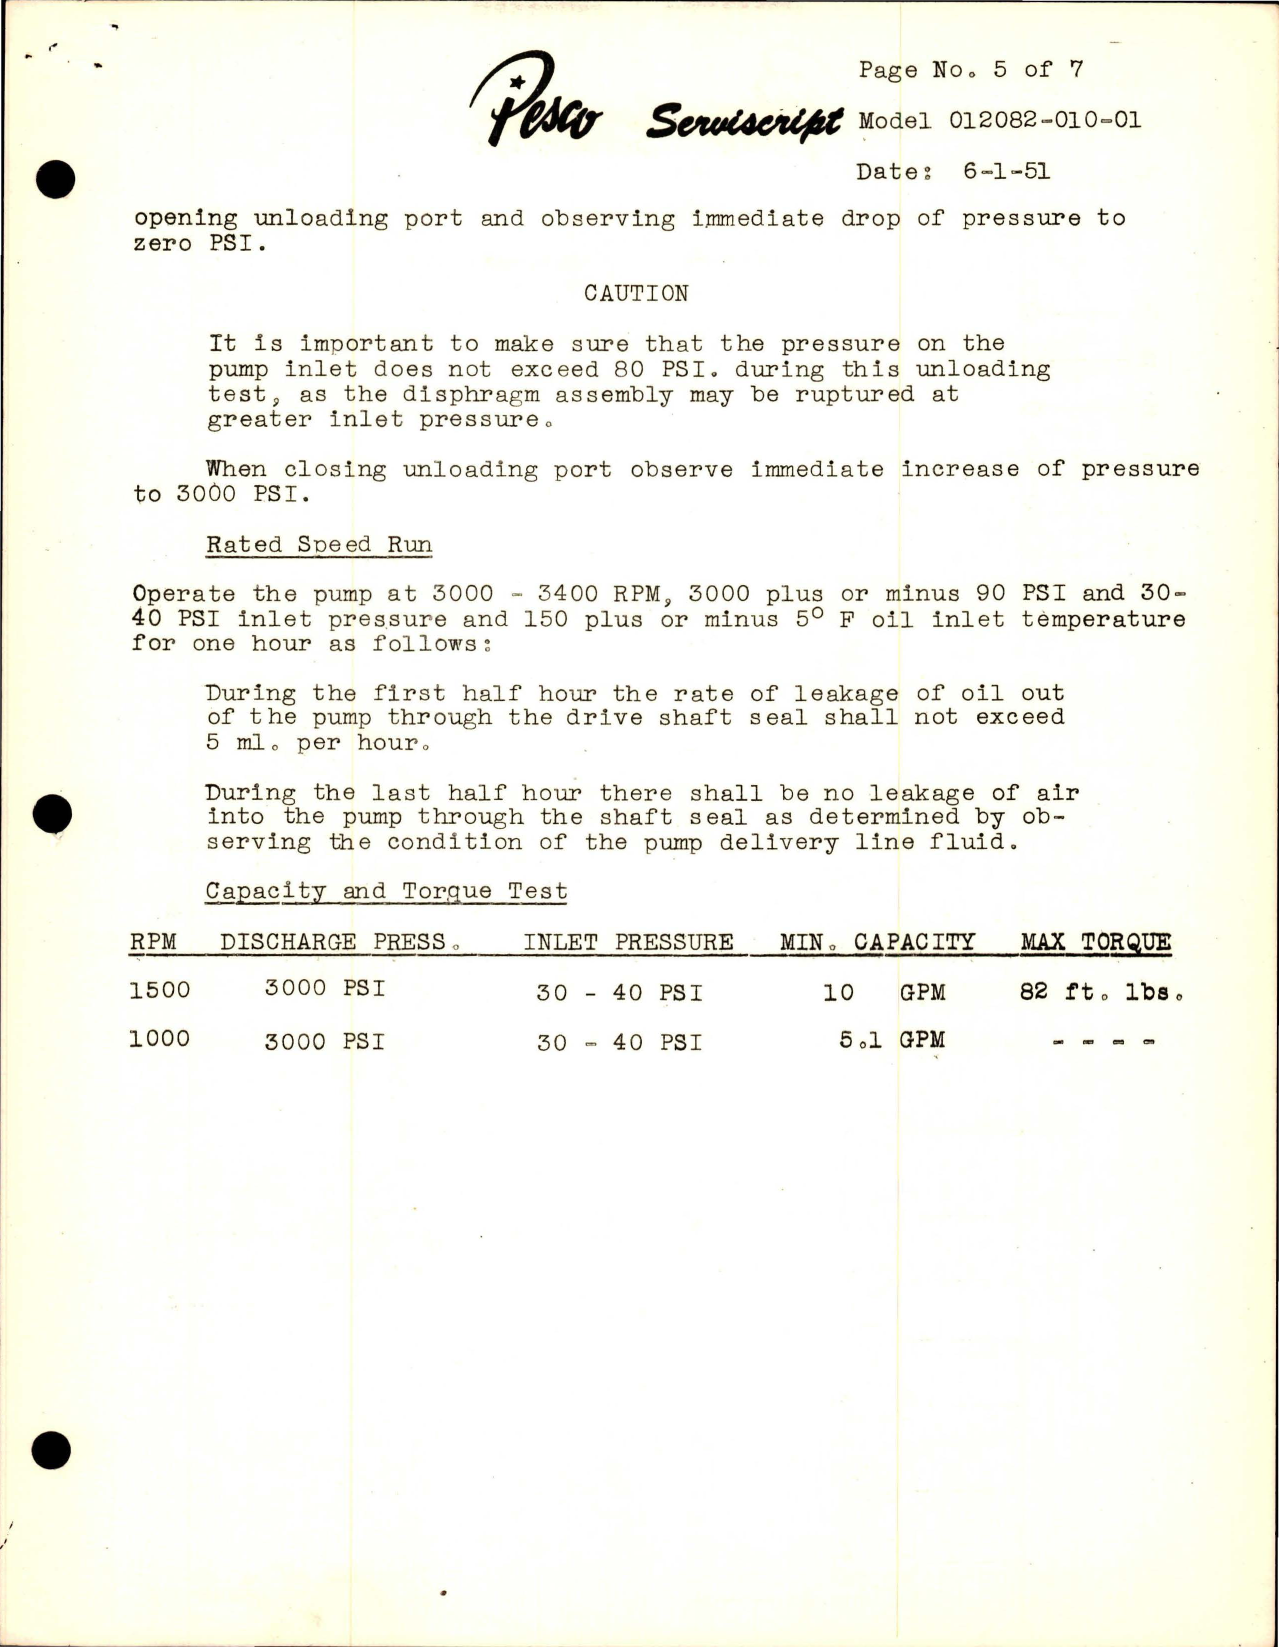 Sample page 5 from AirCorps Library document: Overhaul and Service Instructions for Hydraulic Gear Pump - Model 012082-010-01 